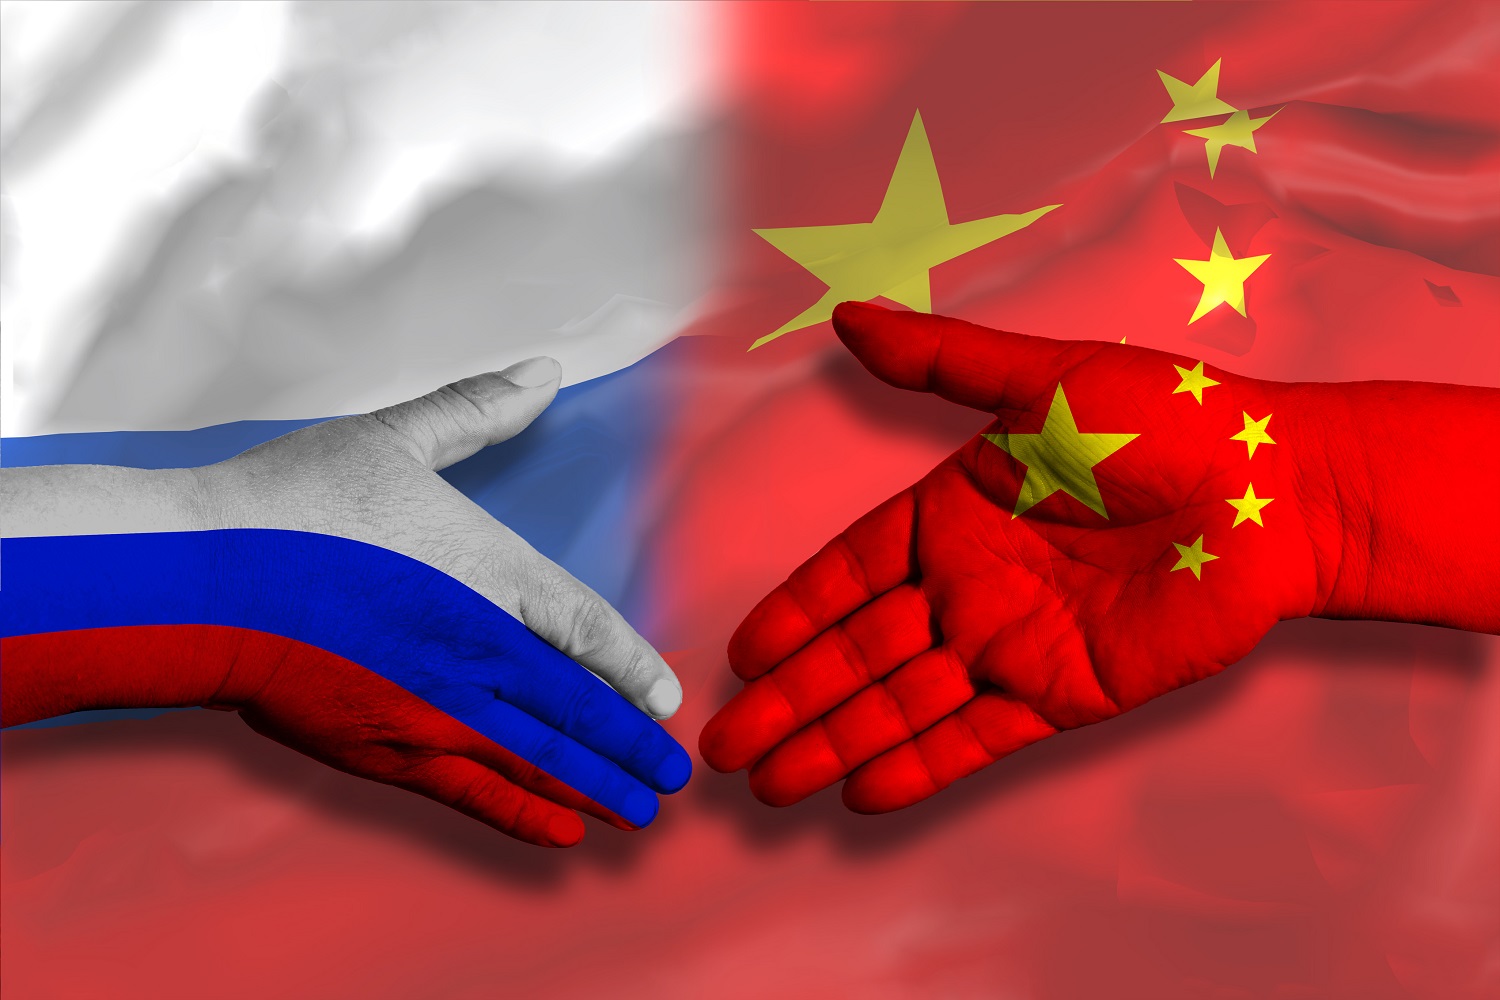 Two hands, one decorated in the colors of the Chinese flag and the other in the colors of the Russian flag, move together as if to shake hands against the backdrop of the flags of both countries.